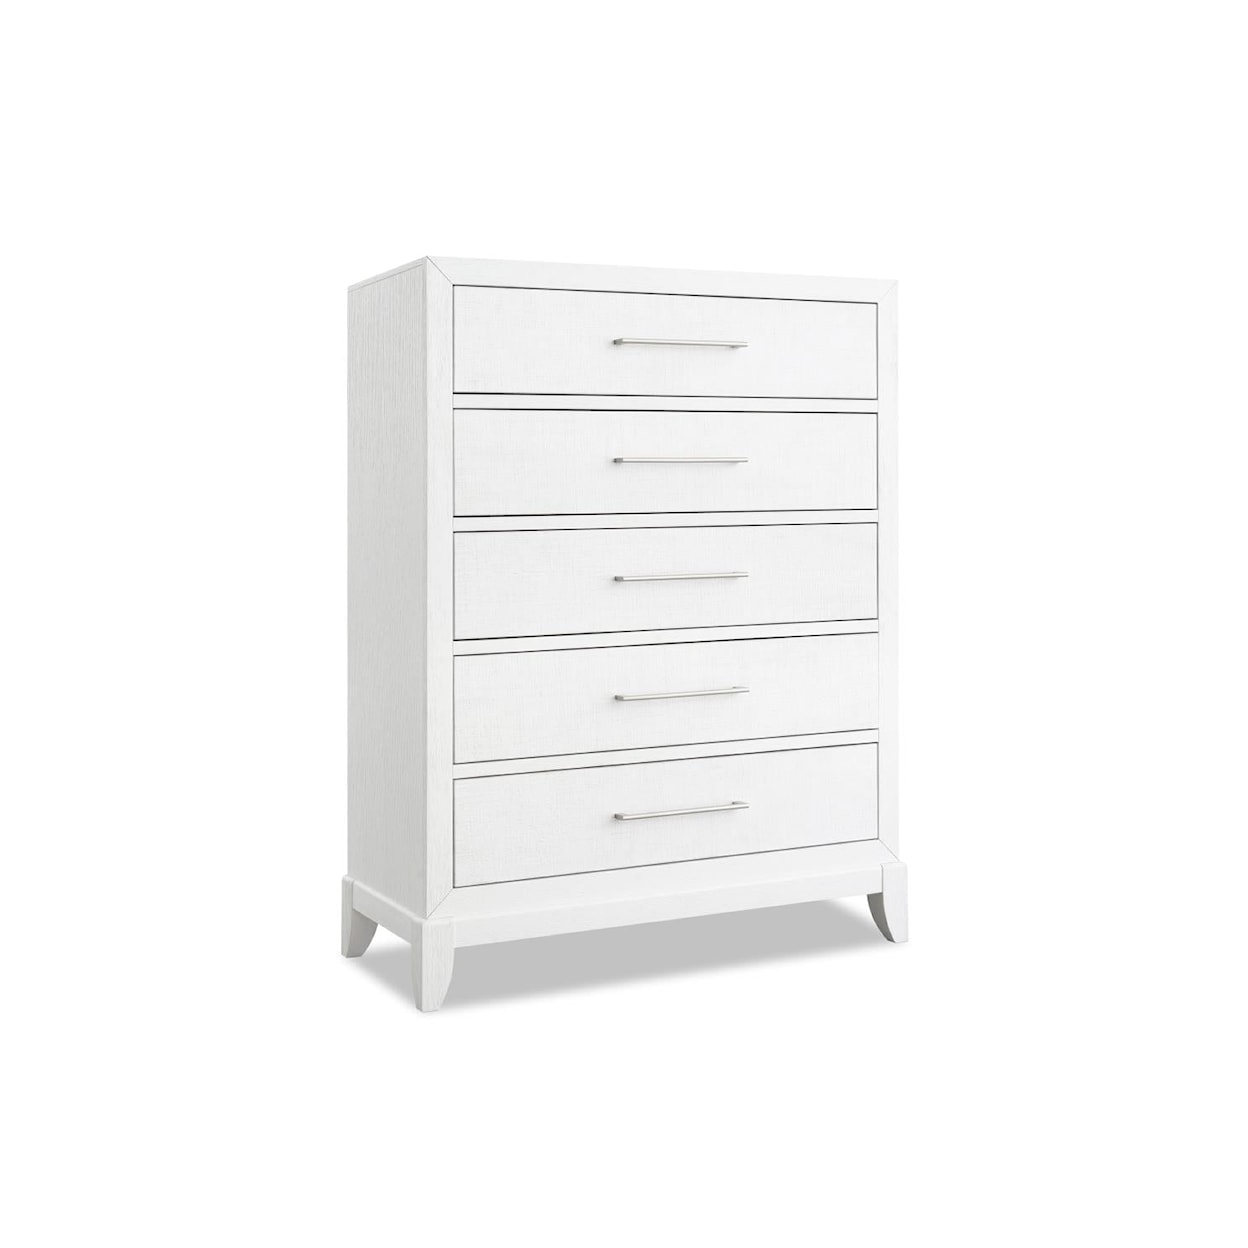 Trisha Yearwood Home Collection by Legacy Classic Staycation Drawer Chest